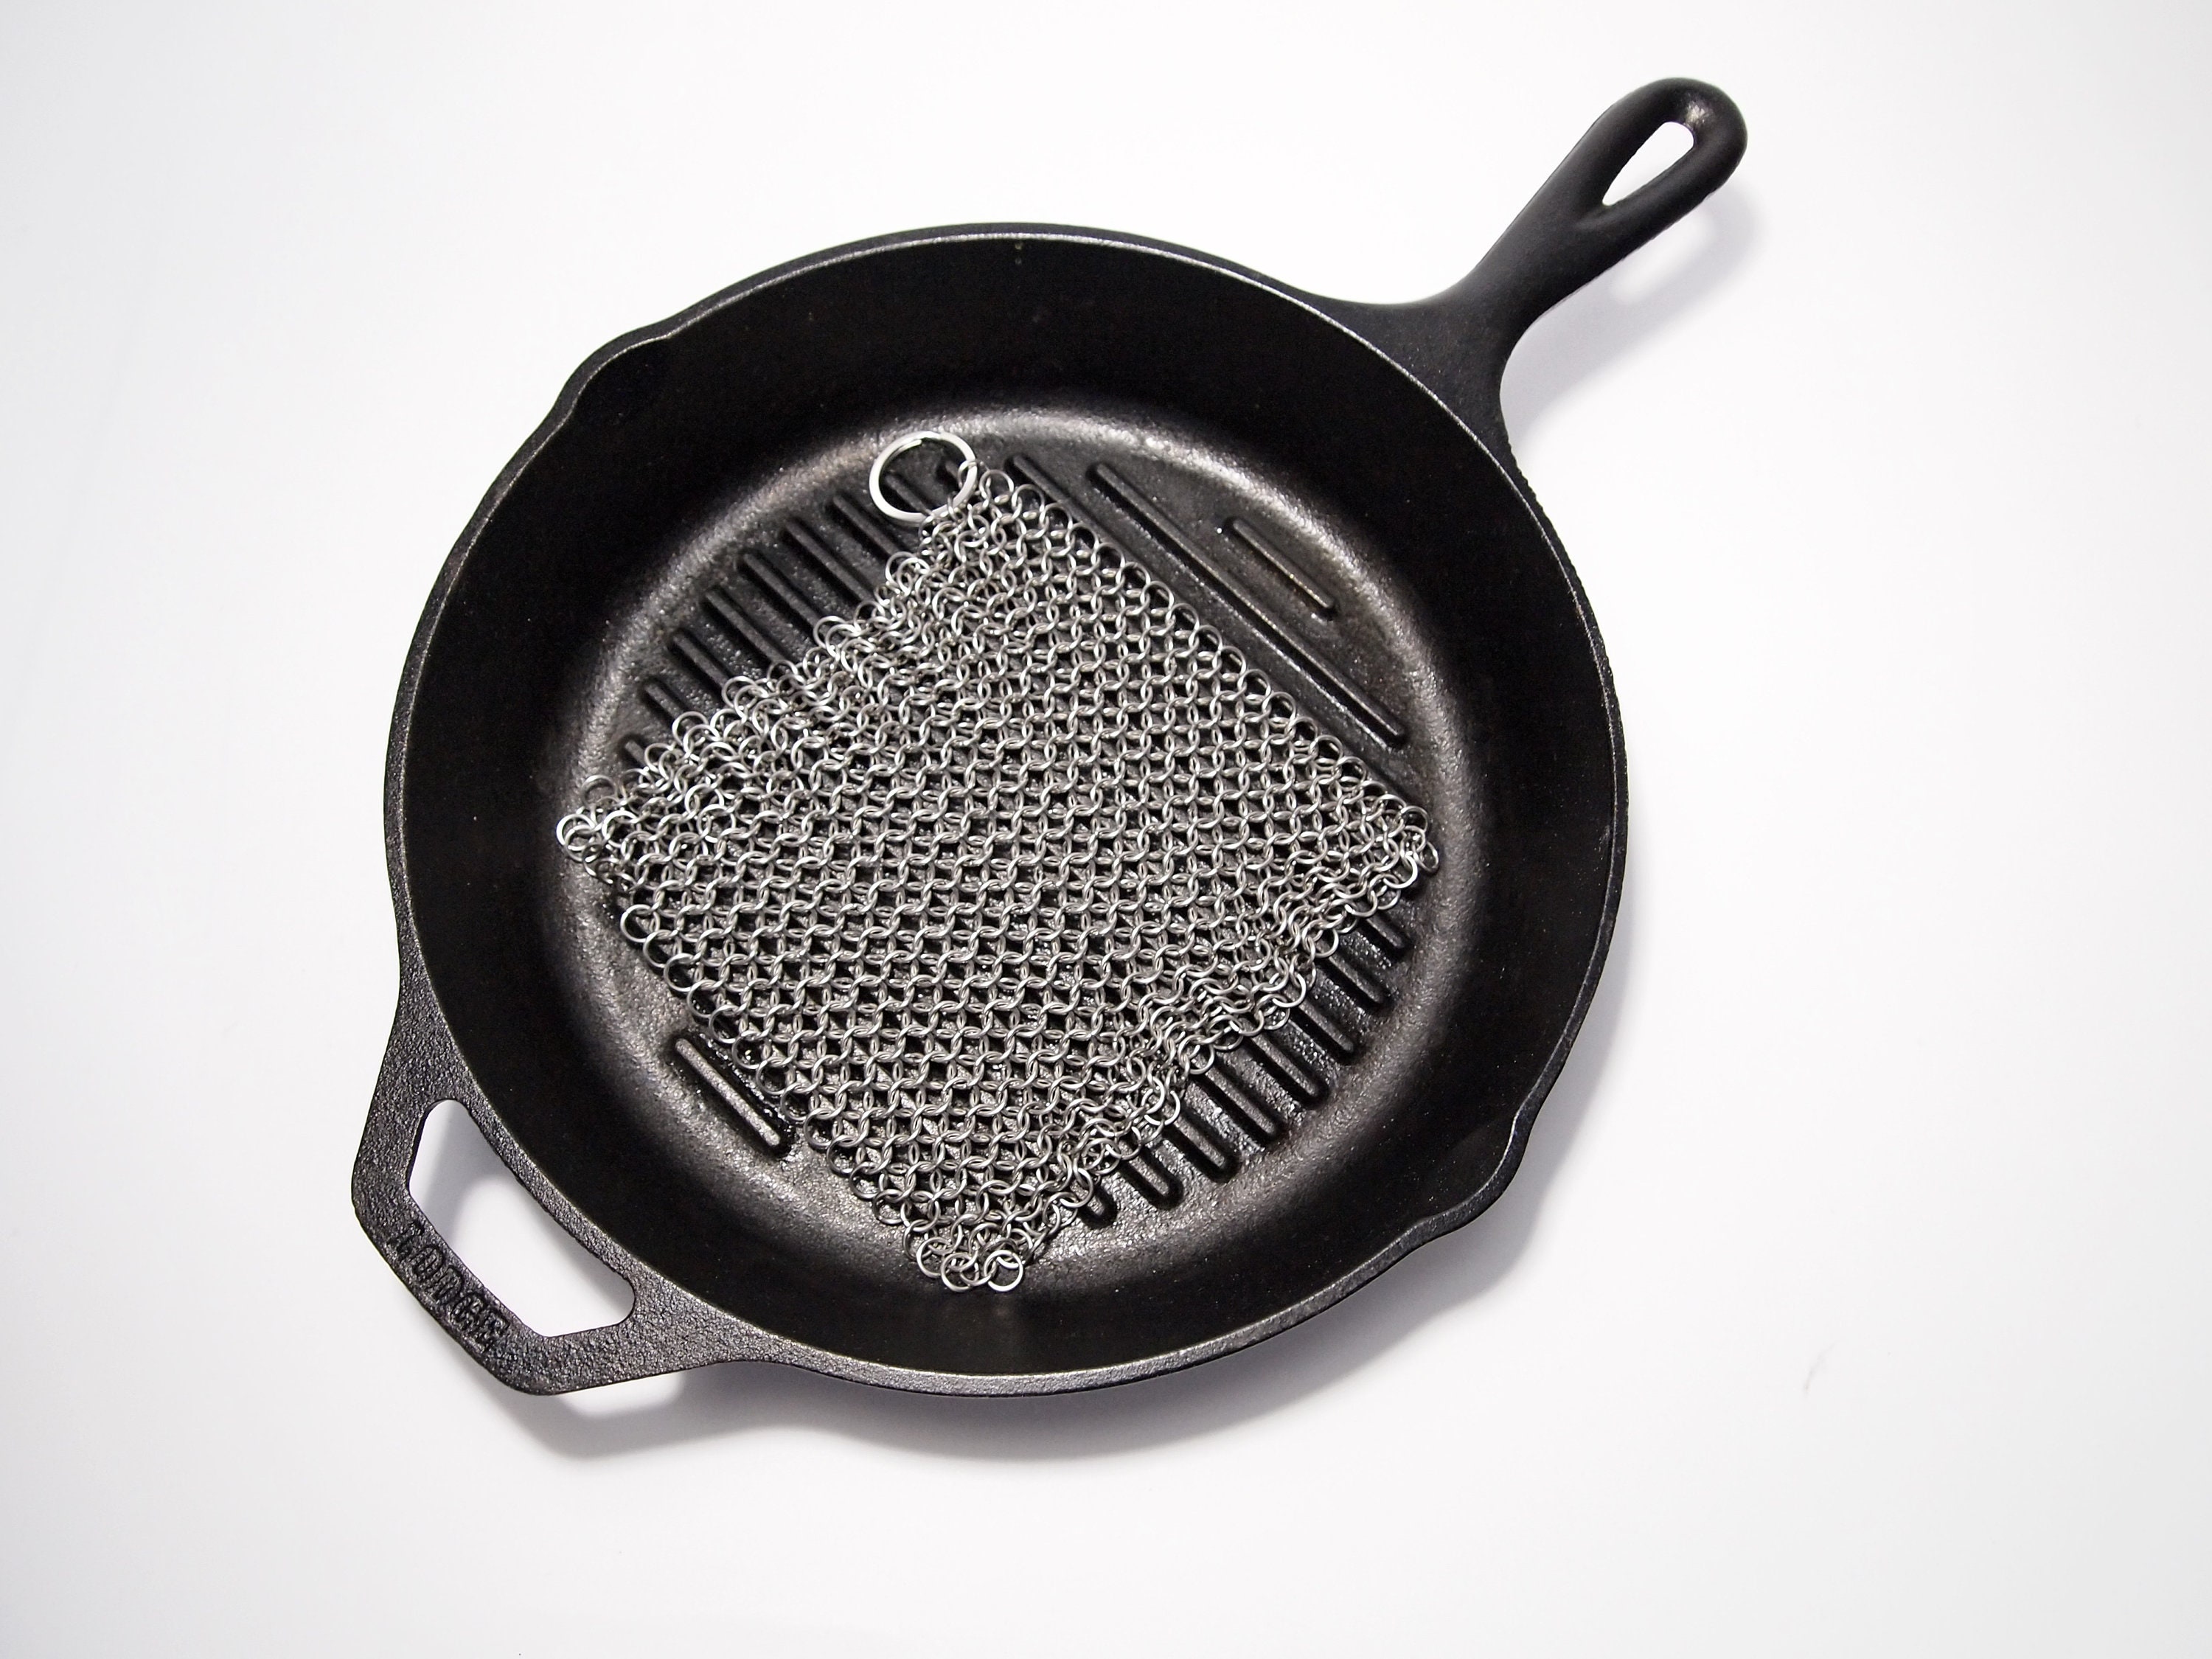 Steel Chainmail Scrubber Reusable Cast Iron Pan Cleaner for Zero